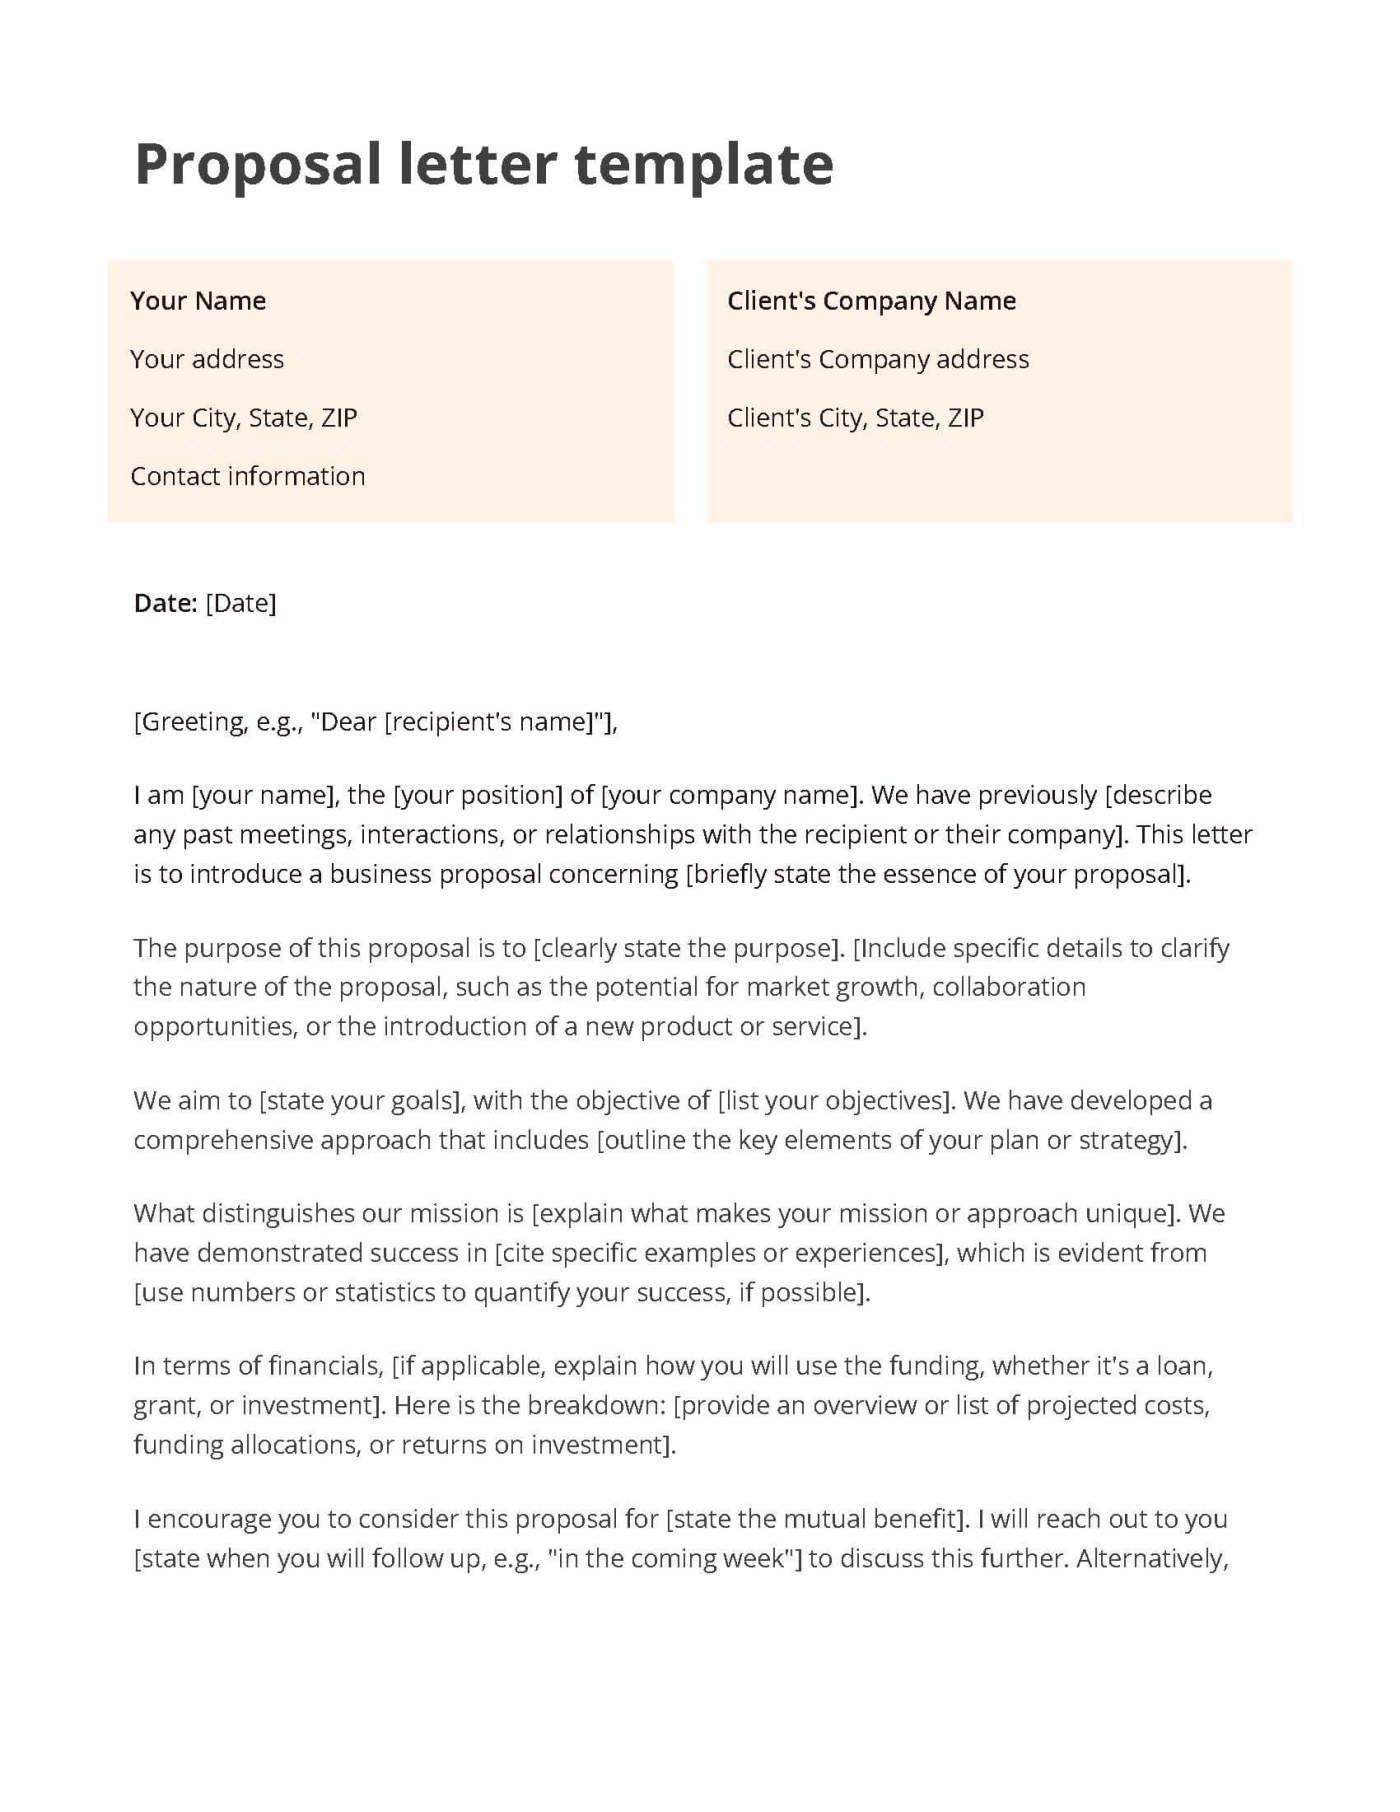 Orange and white proposal letter template including an overview of the benefits and value proposition